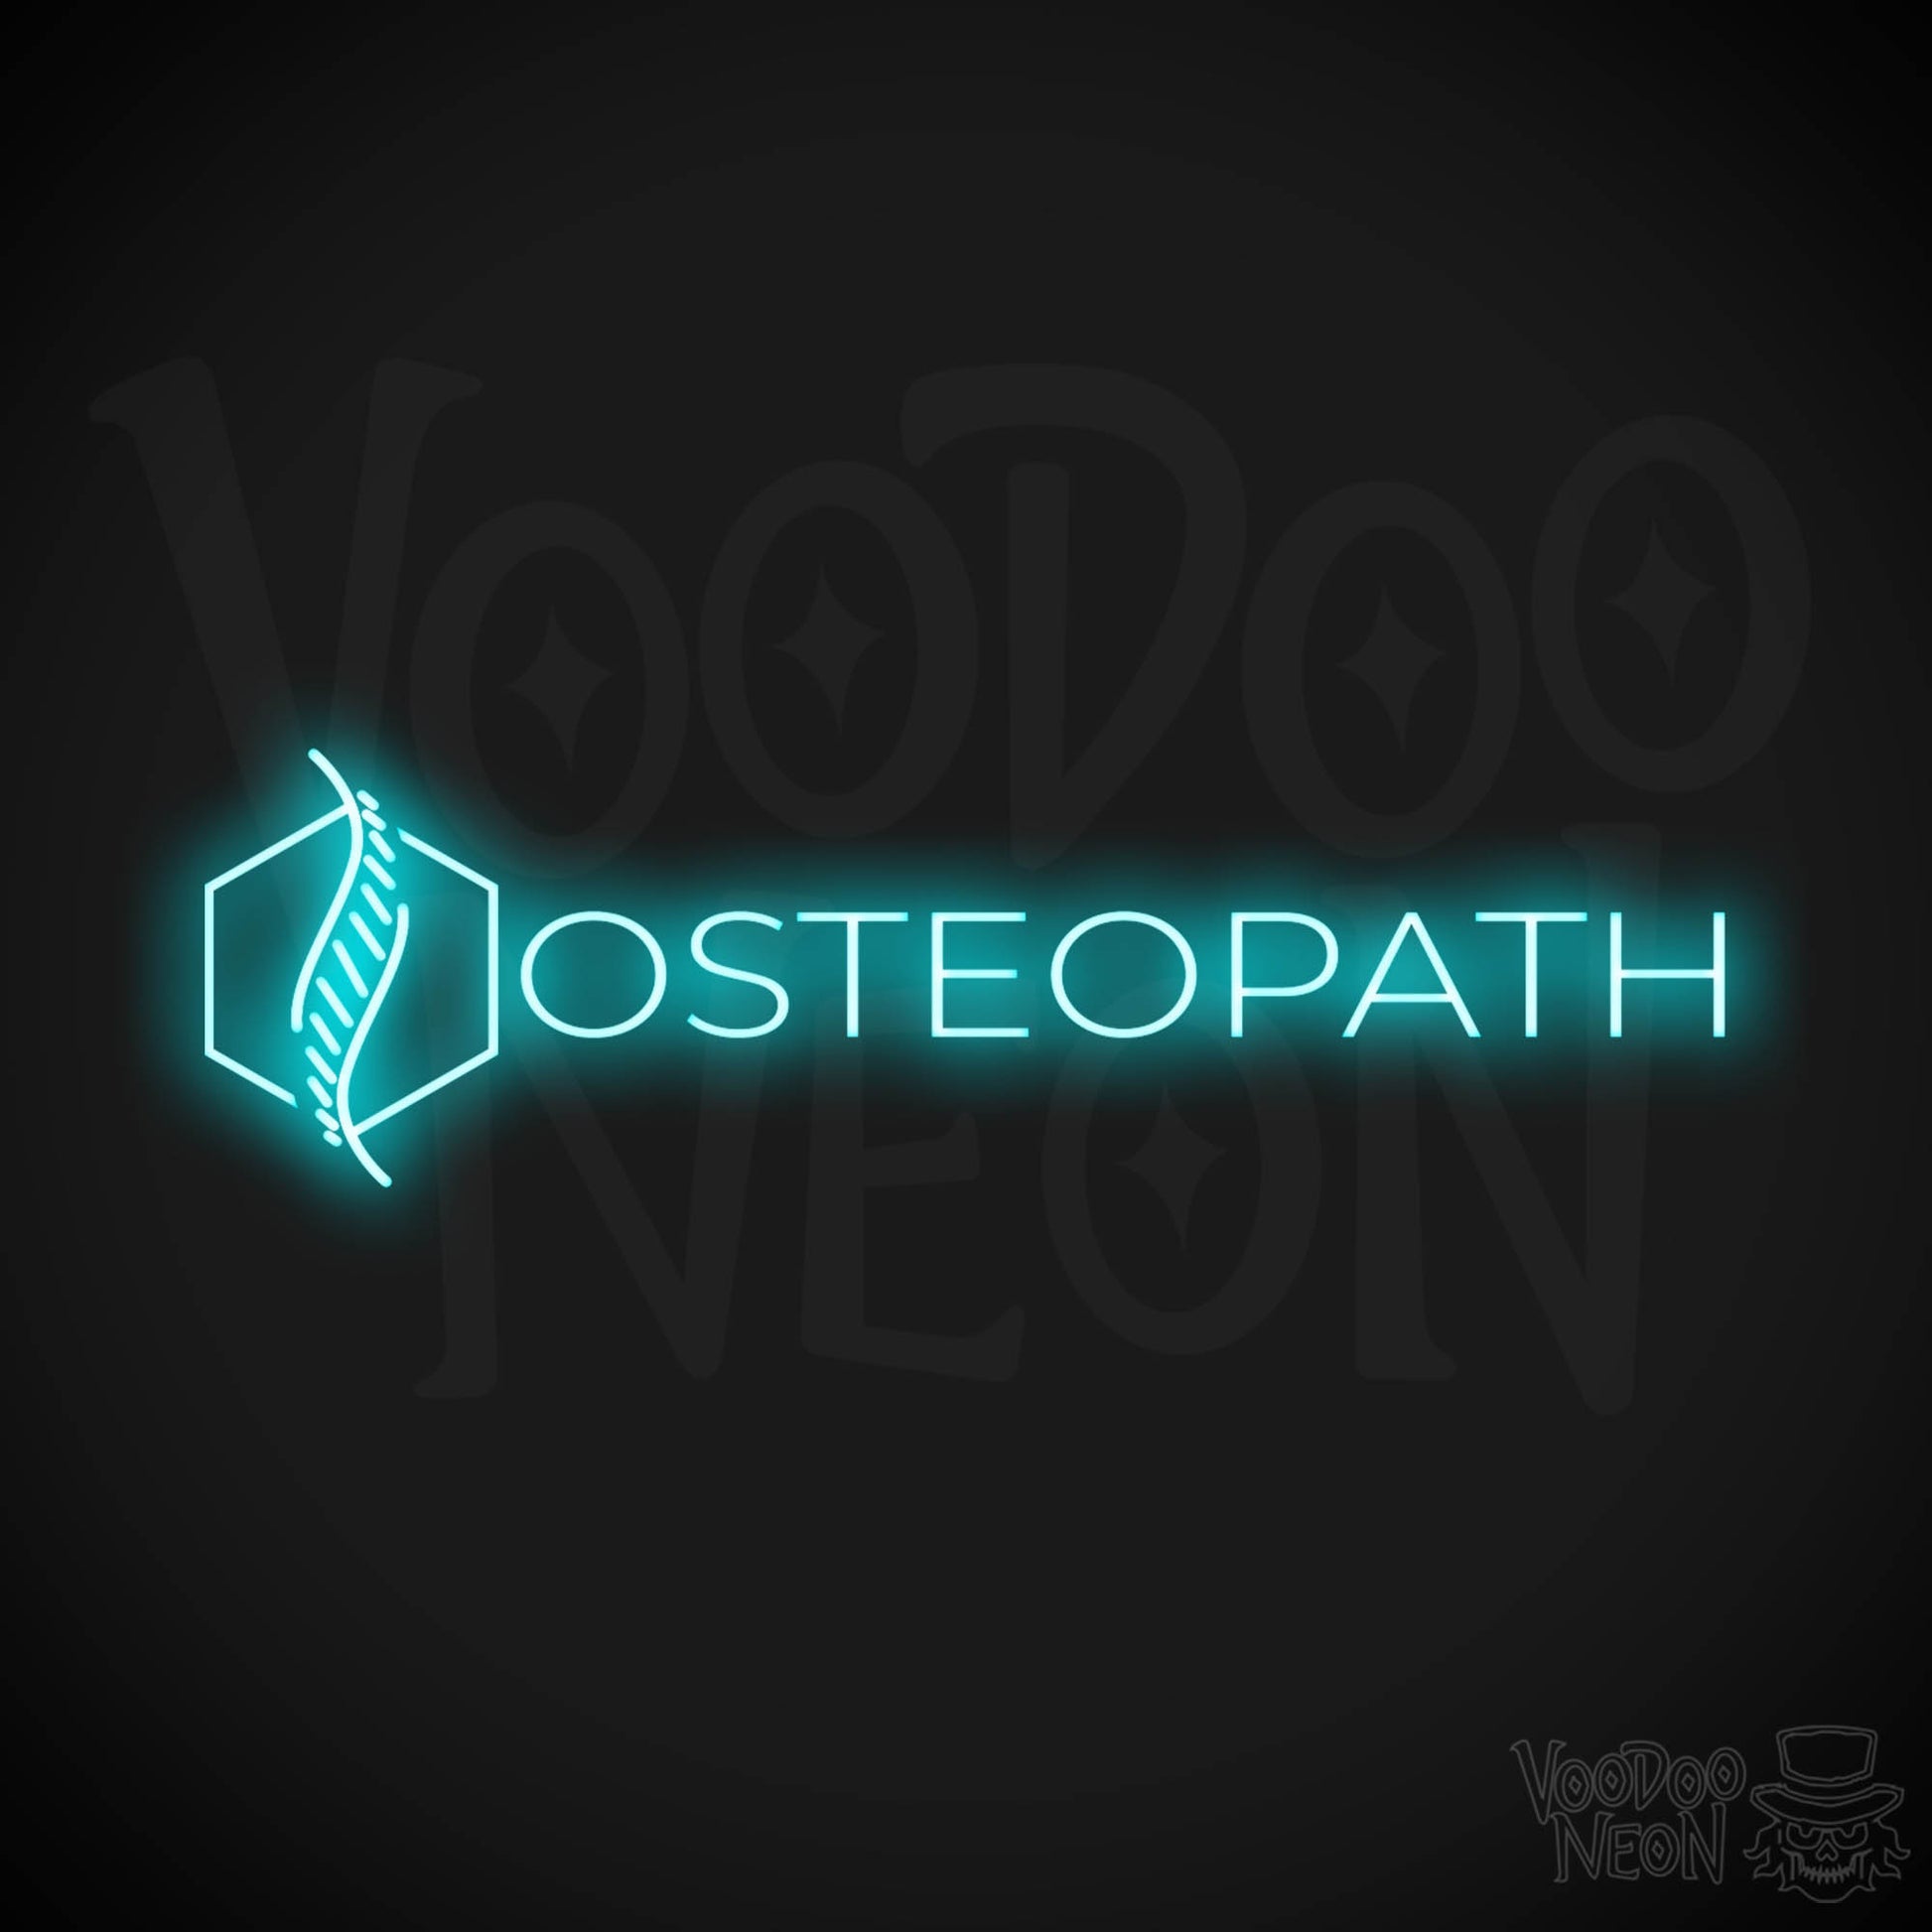 Osteopath LED Neon - Ice Blue